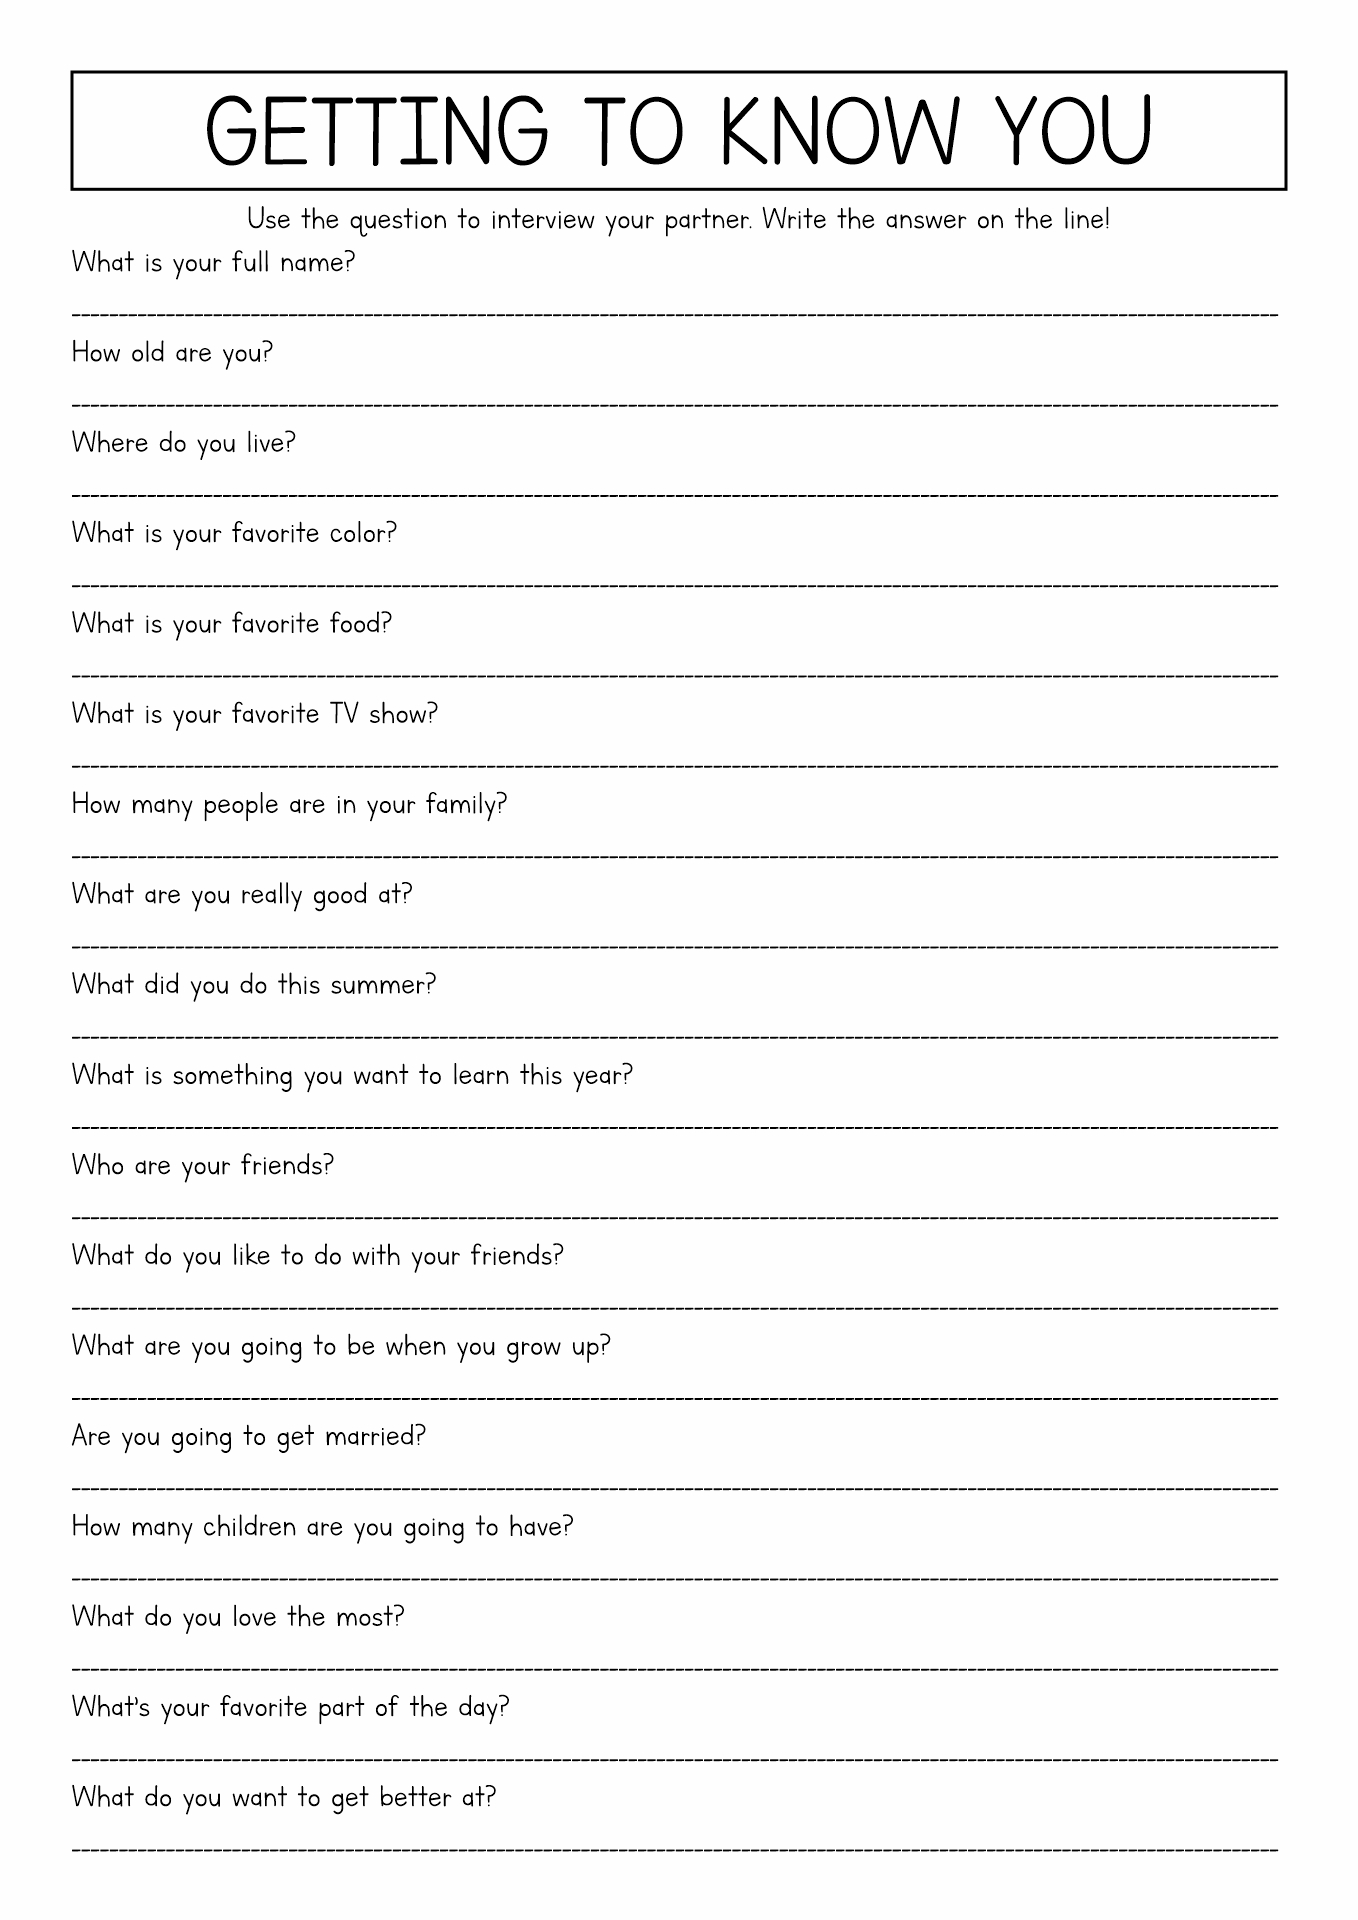 13 Best Images of Get To Know Me Worksheet - Get to Know You Worksheet ...